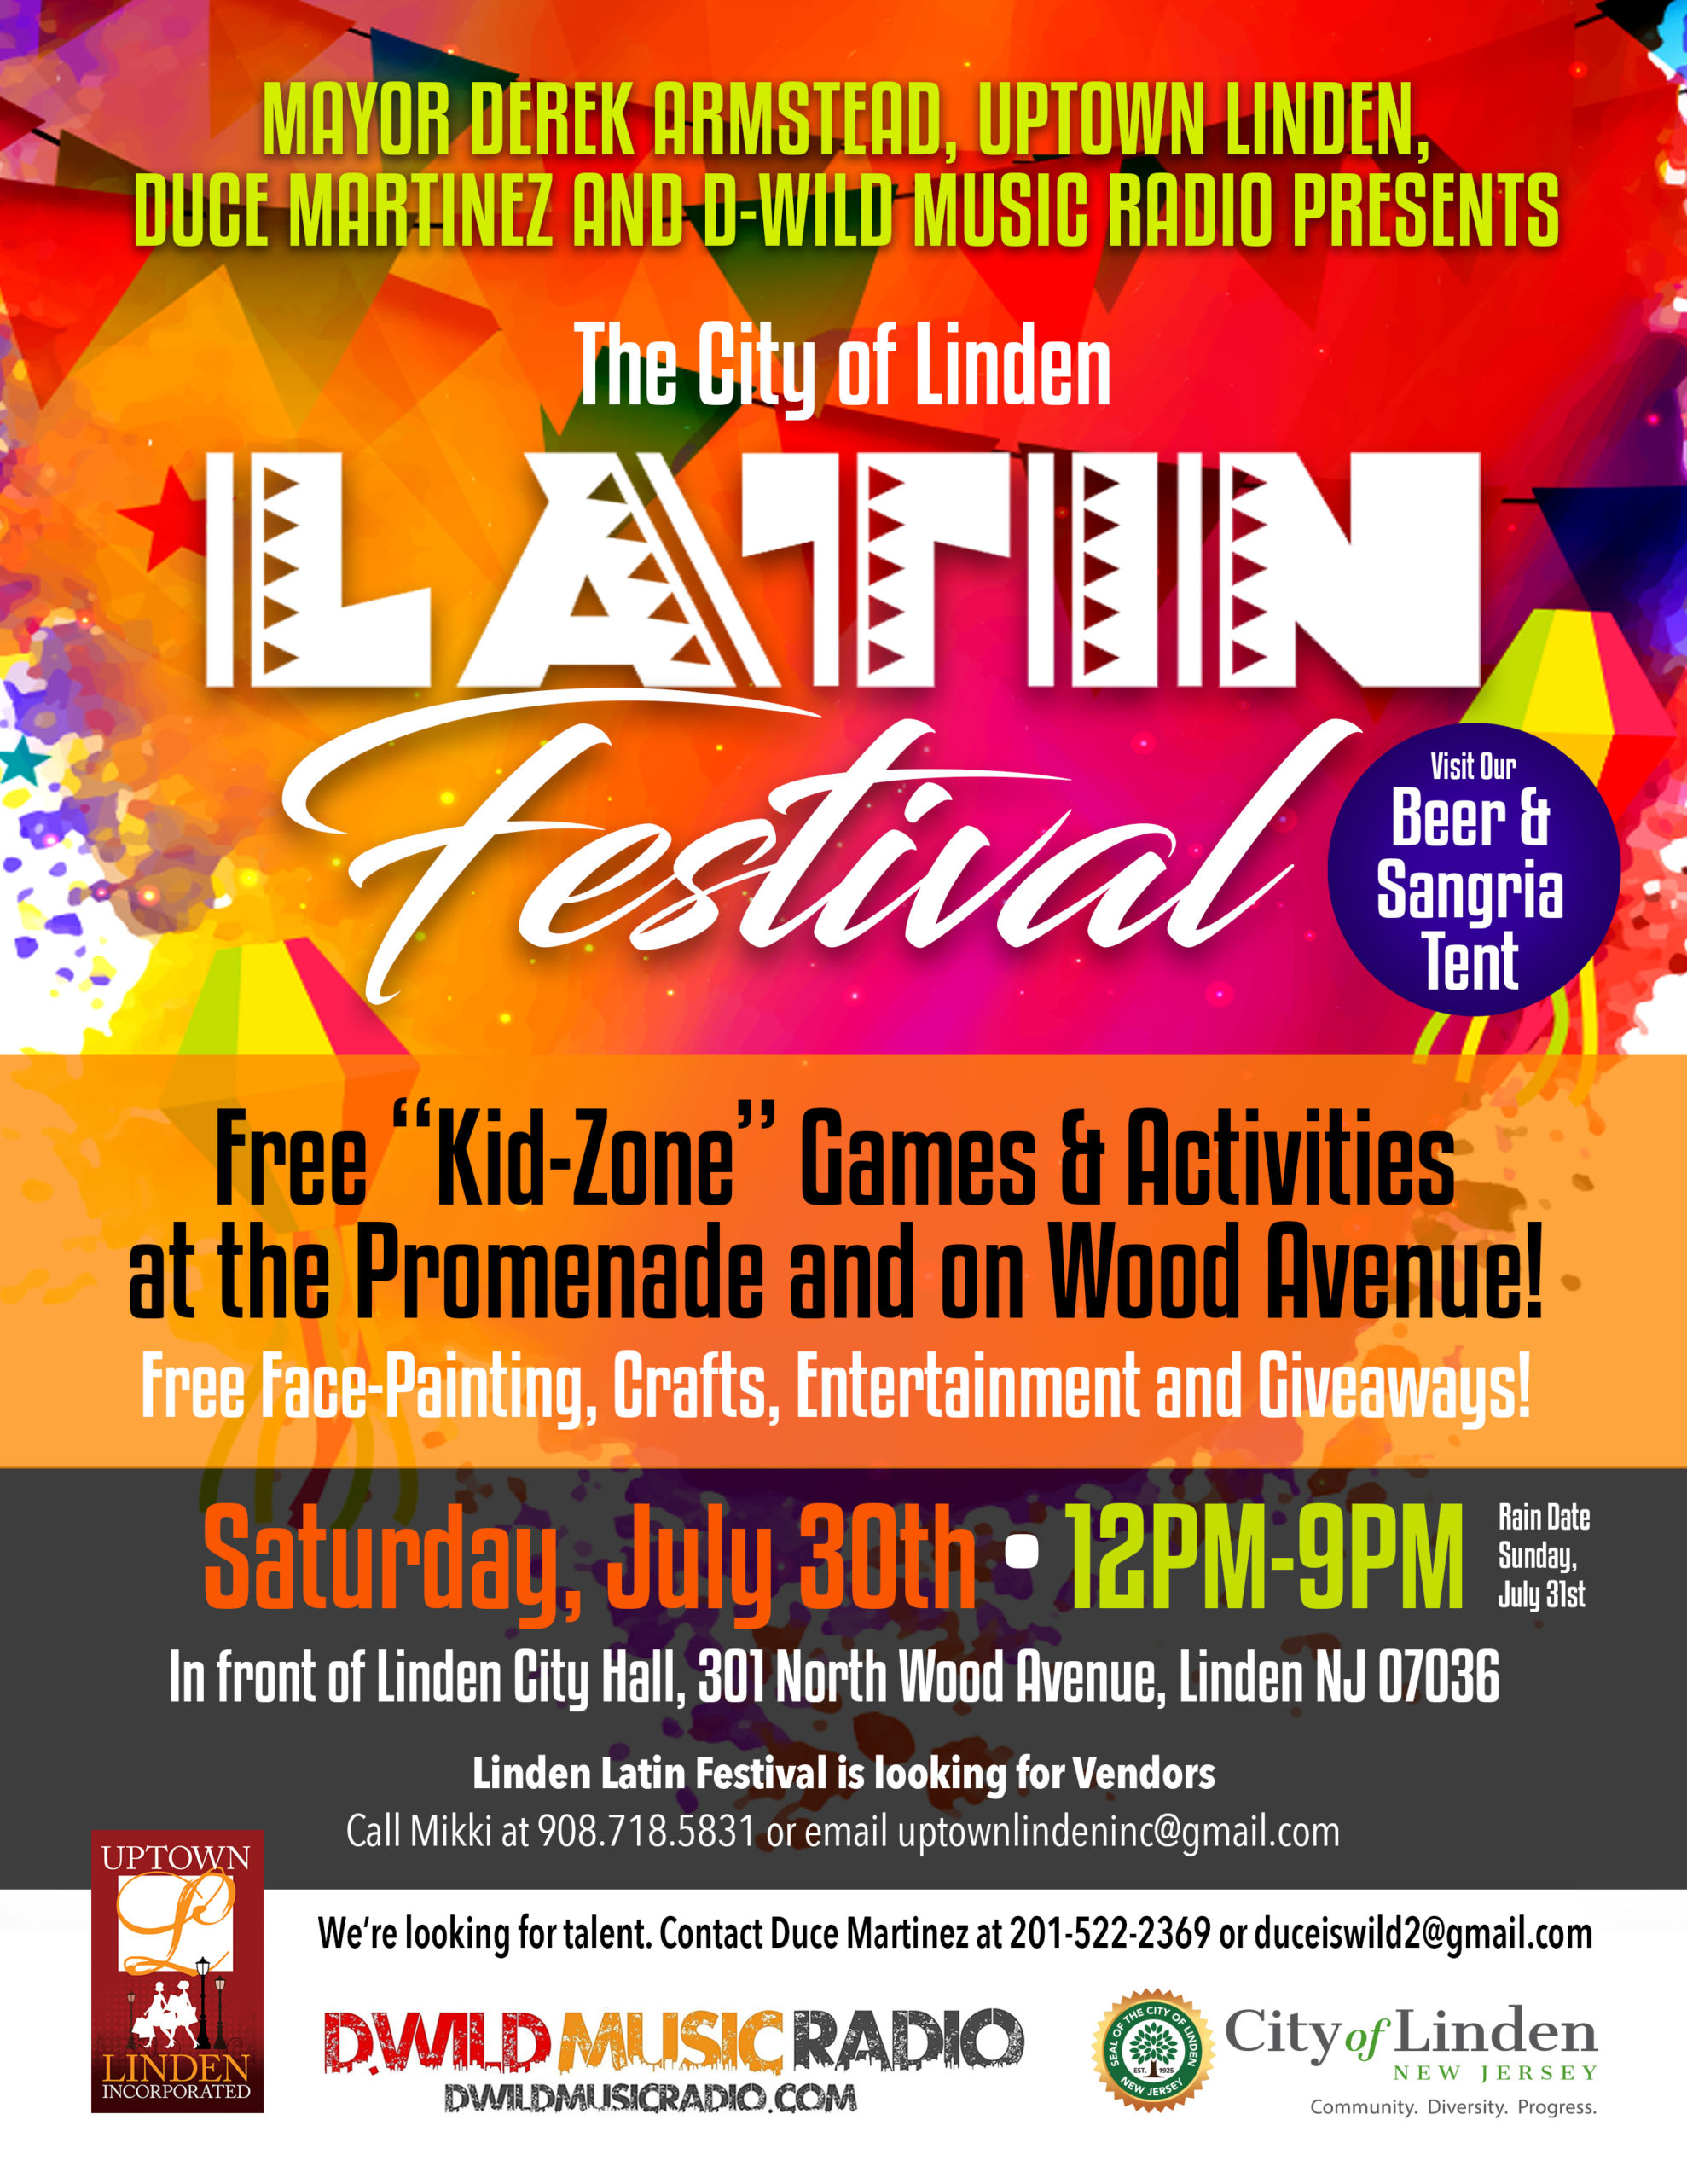 The City of Linden Latin Festival! City of Linden